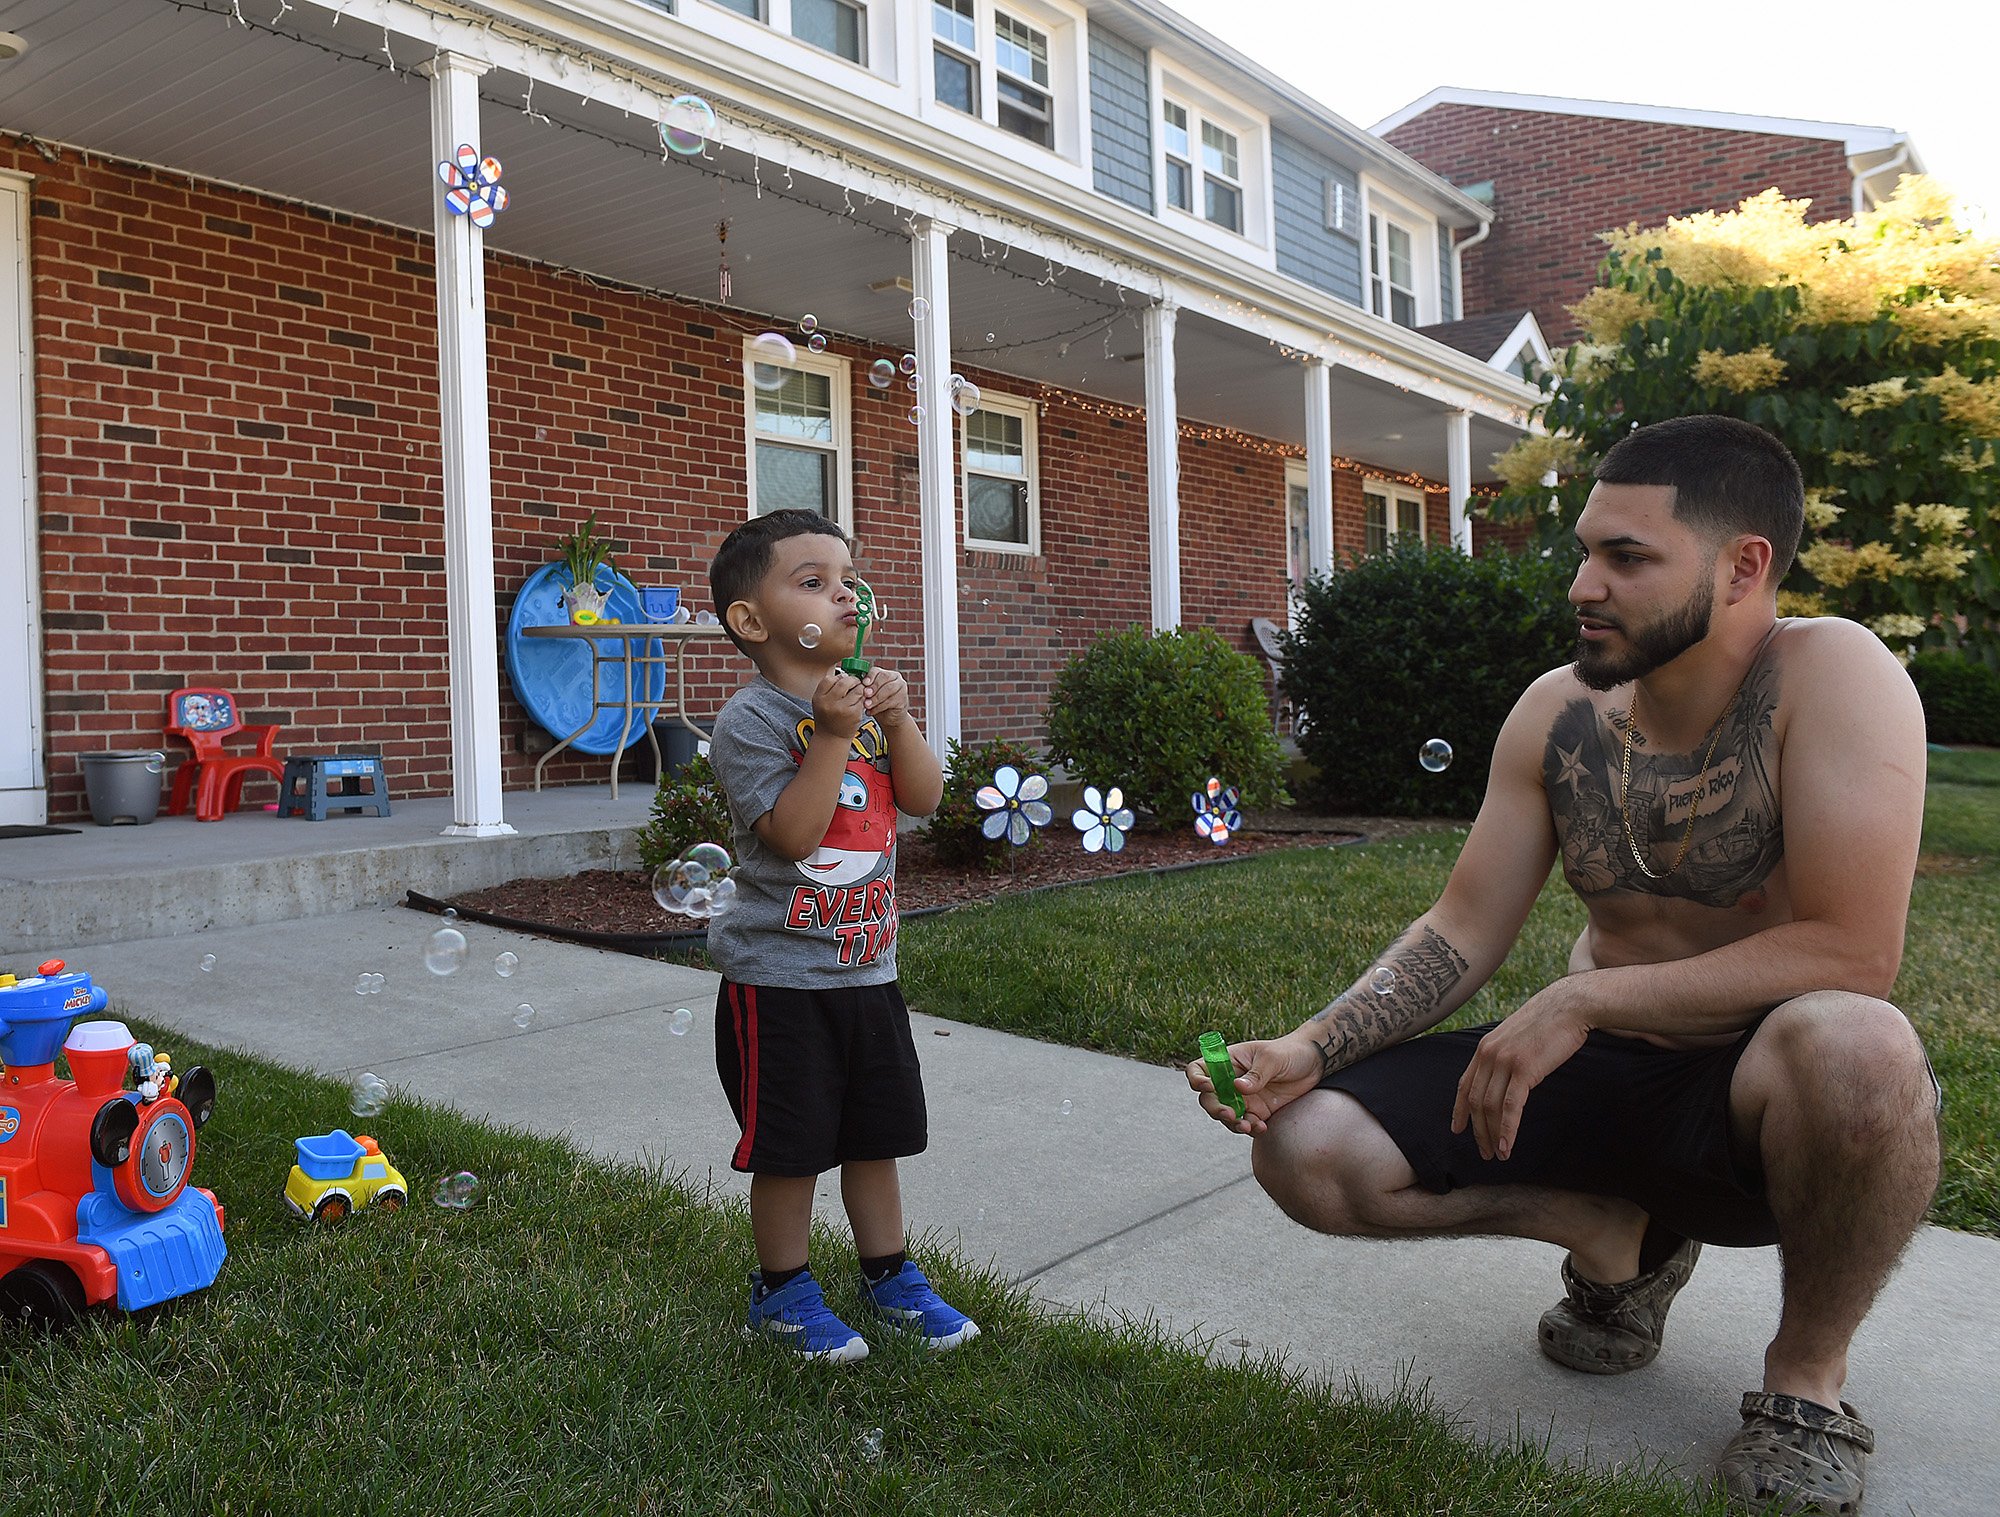  Yadiel A. Reyes looks on as his son Adrian A., 2, blows bubbles outside his mother Yesenia Nieves’ Carabetta apartment in New London Monday June 20, 2022. The family has lived there for 14 years.“We were just sitting out here talking about buying a 